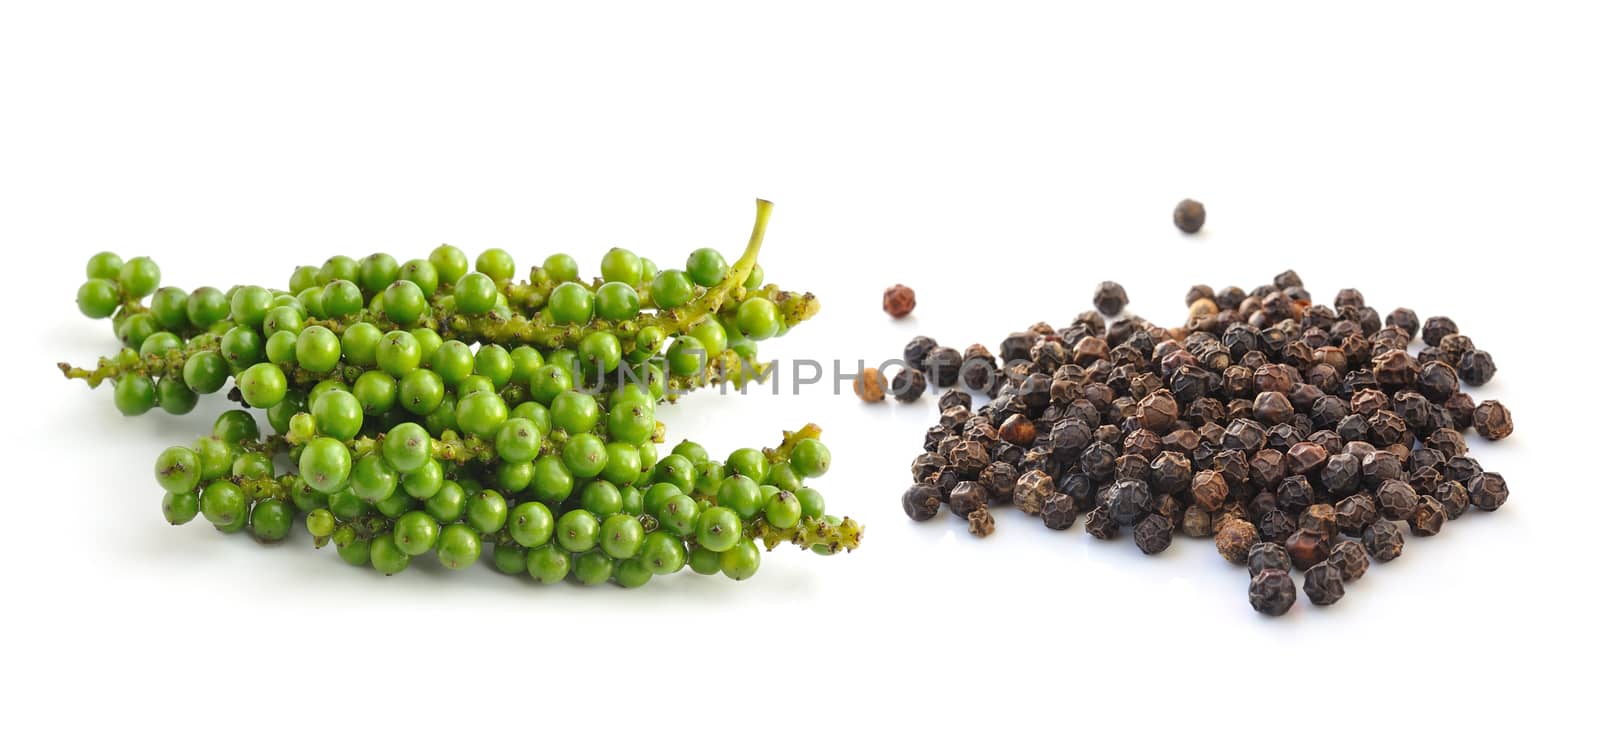 Bunches of fresh green pepper and Black peppercorn isolated on w by sommai